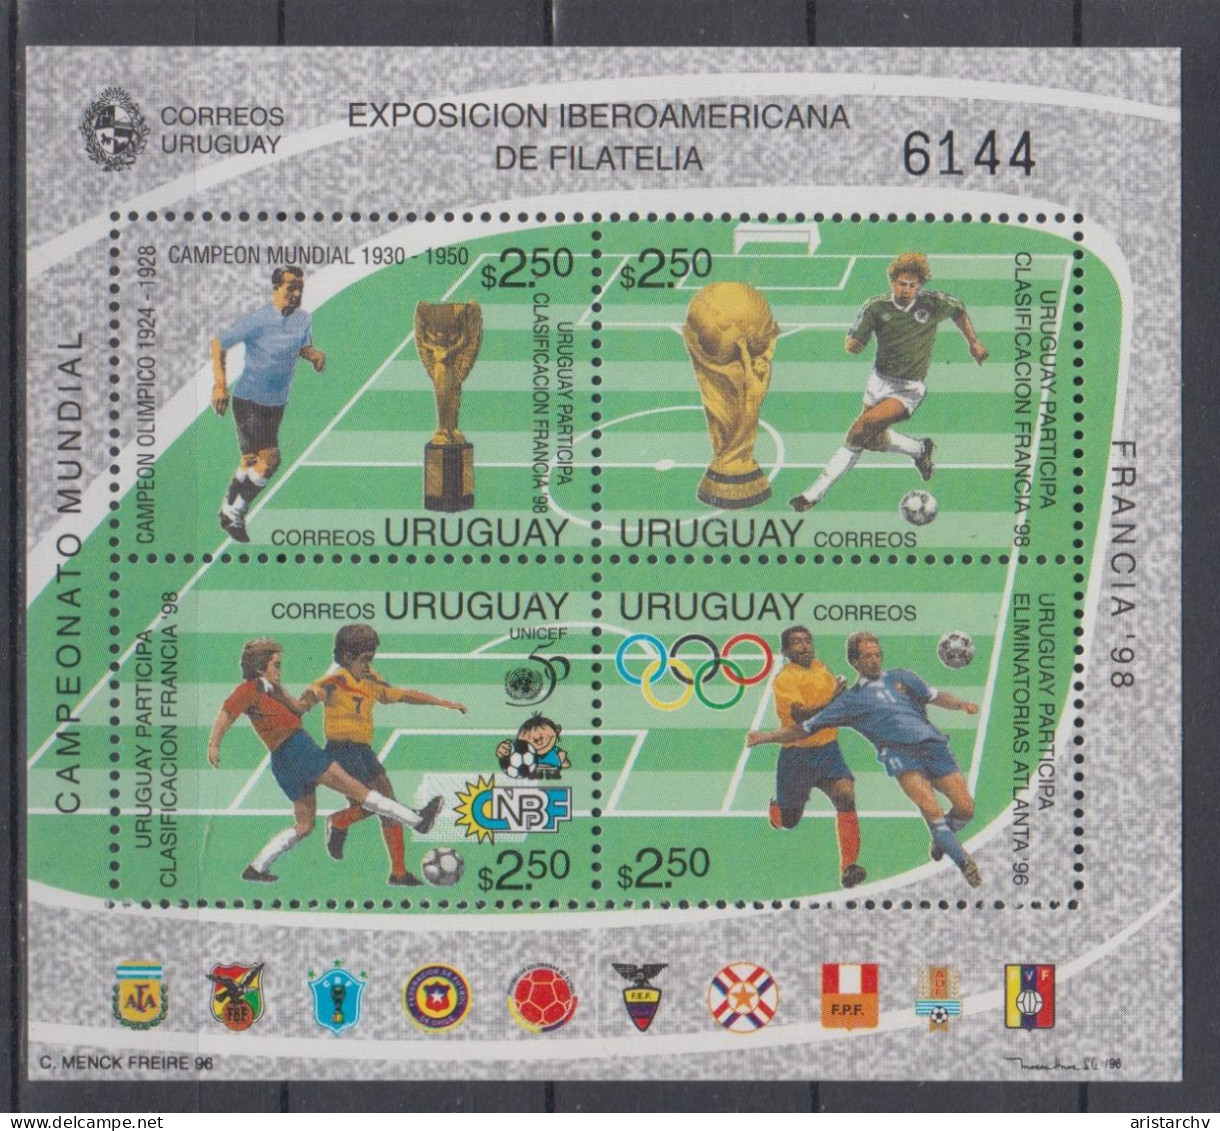 URUGUAY 1998 FOOTBALL WORLD CUP OLYMPIC GAMES STAMPS EXHIBITION IMPERFORATED AND PERFORATED S/SHEETS - 1998 – France